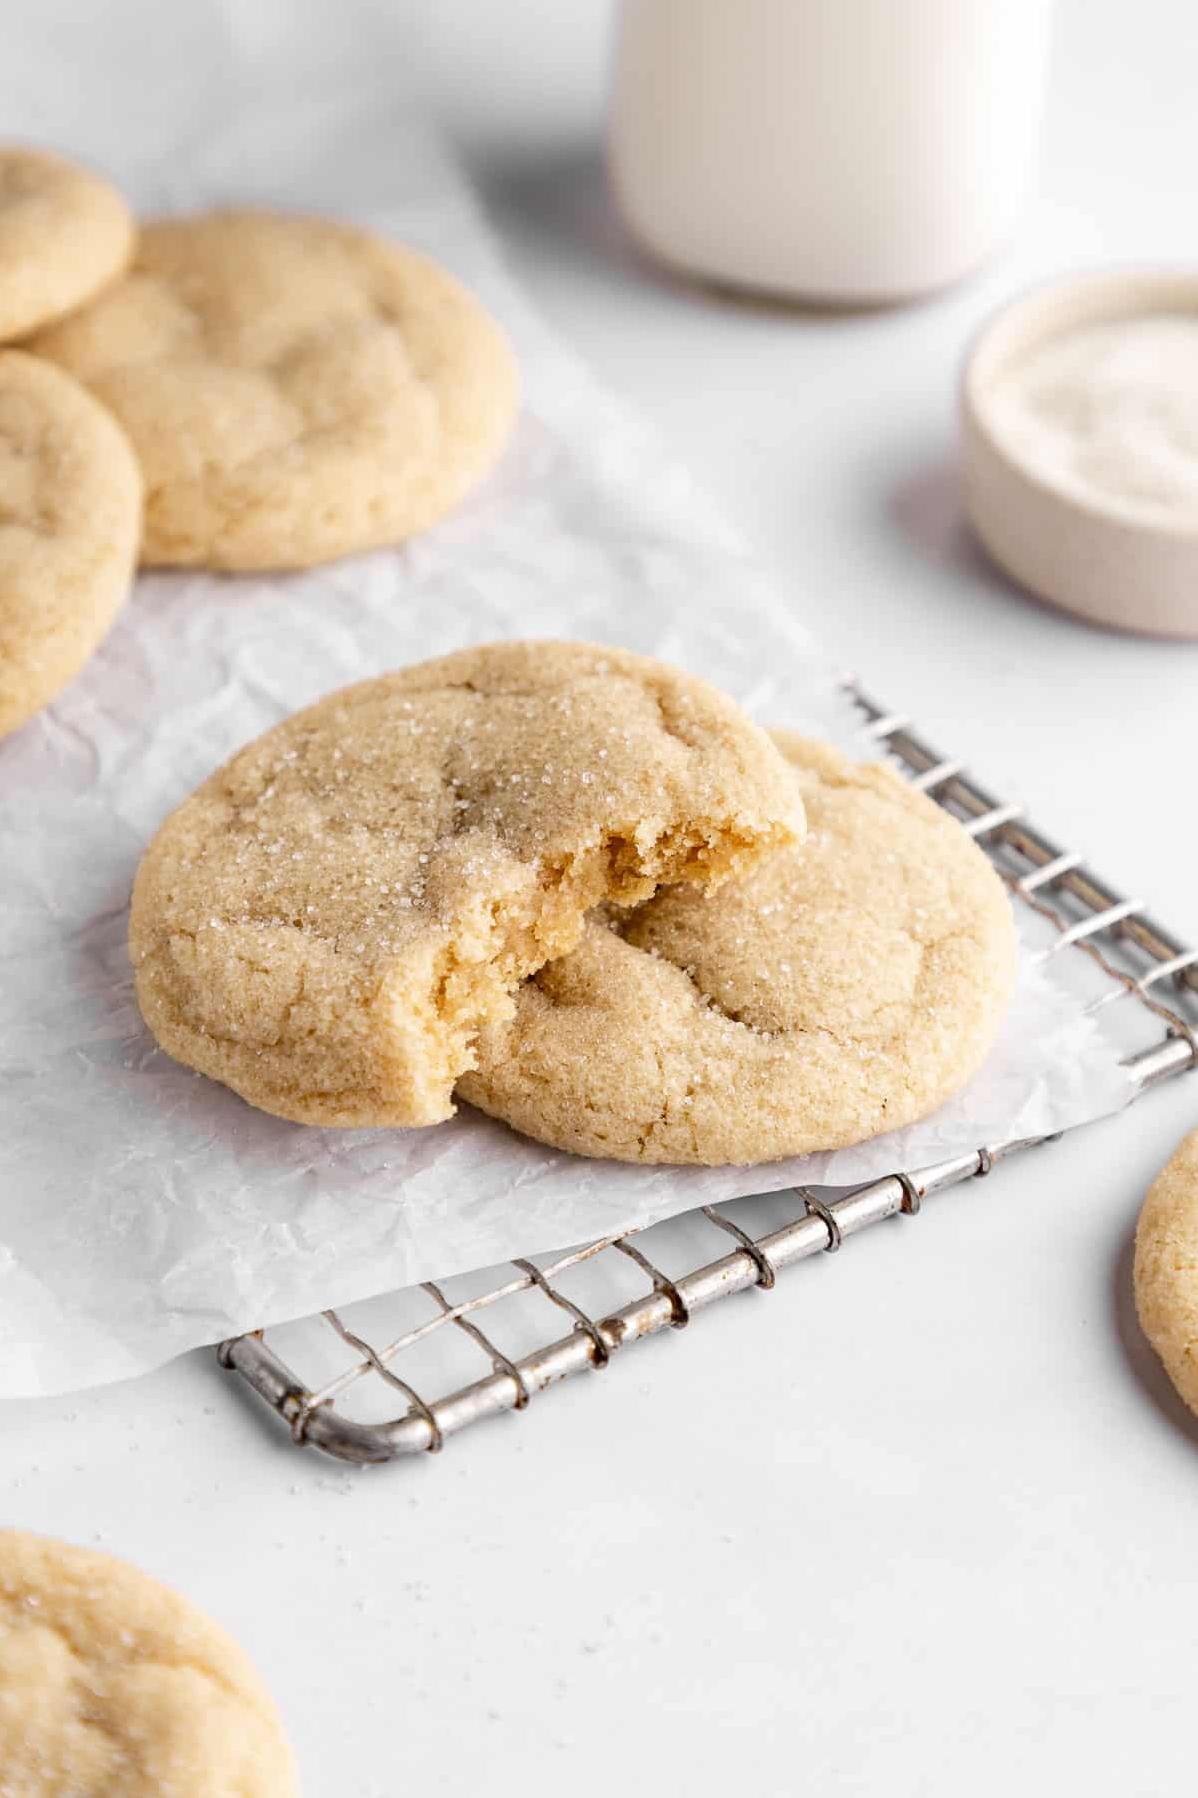  Bake a batch of these vegan cookies and share with your friends and family!